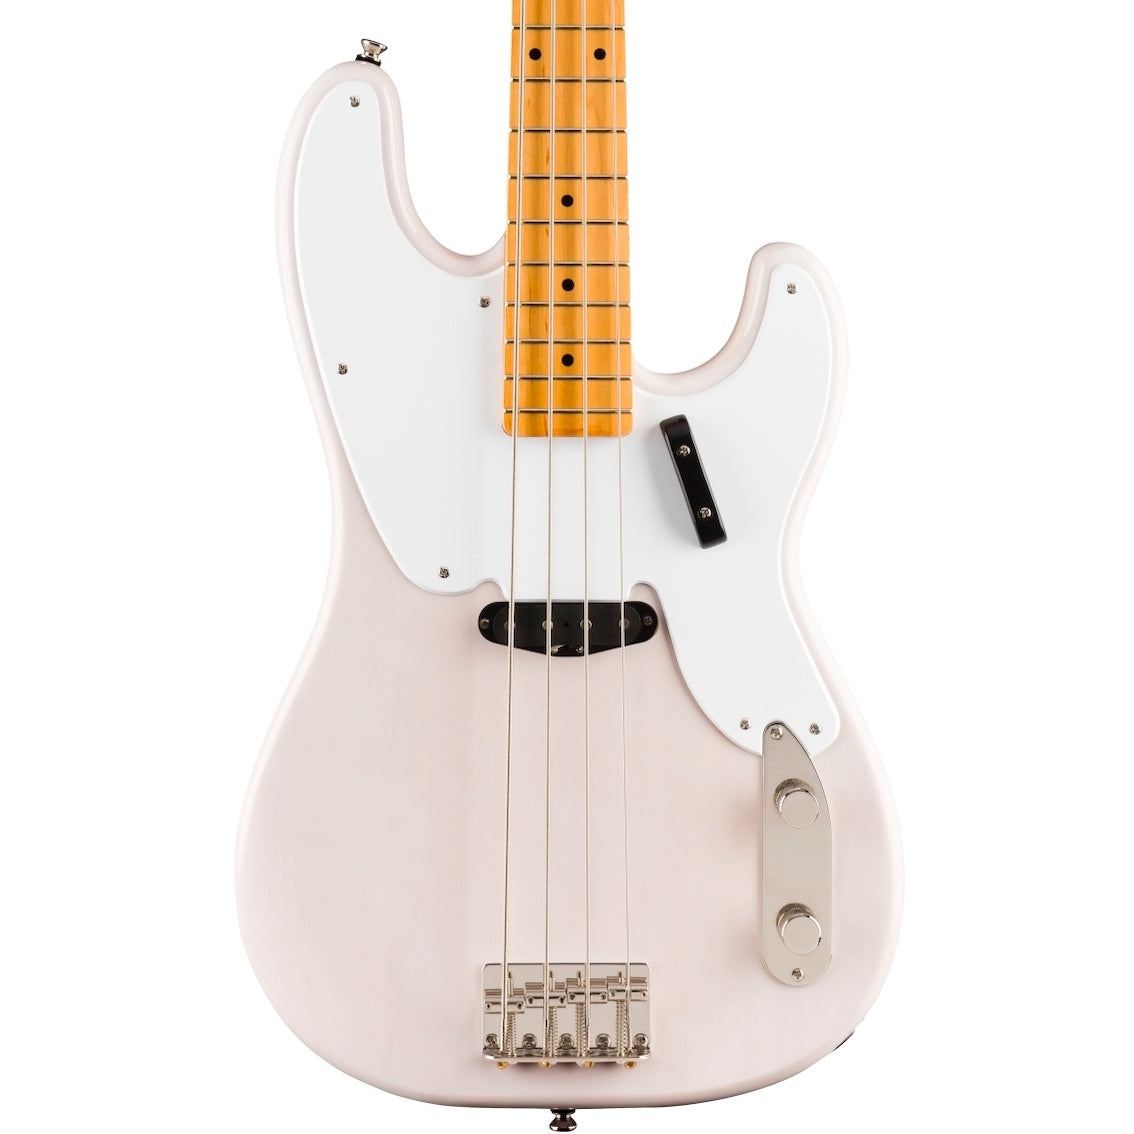 Fender Squier Classic Vibe '50s Precision Bass White Blonde | Music Experience | Shop Online | South Africa